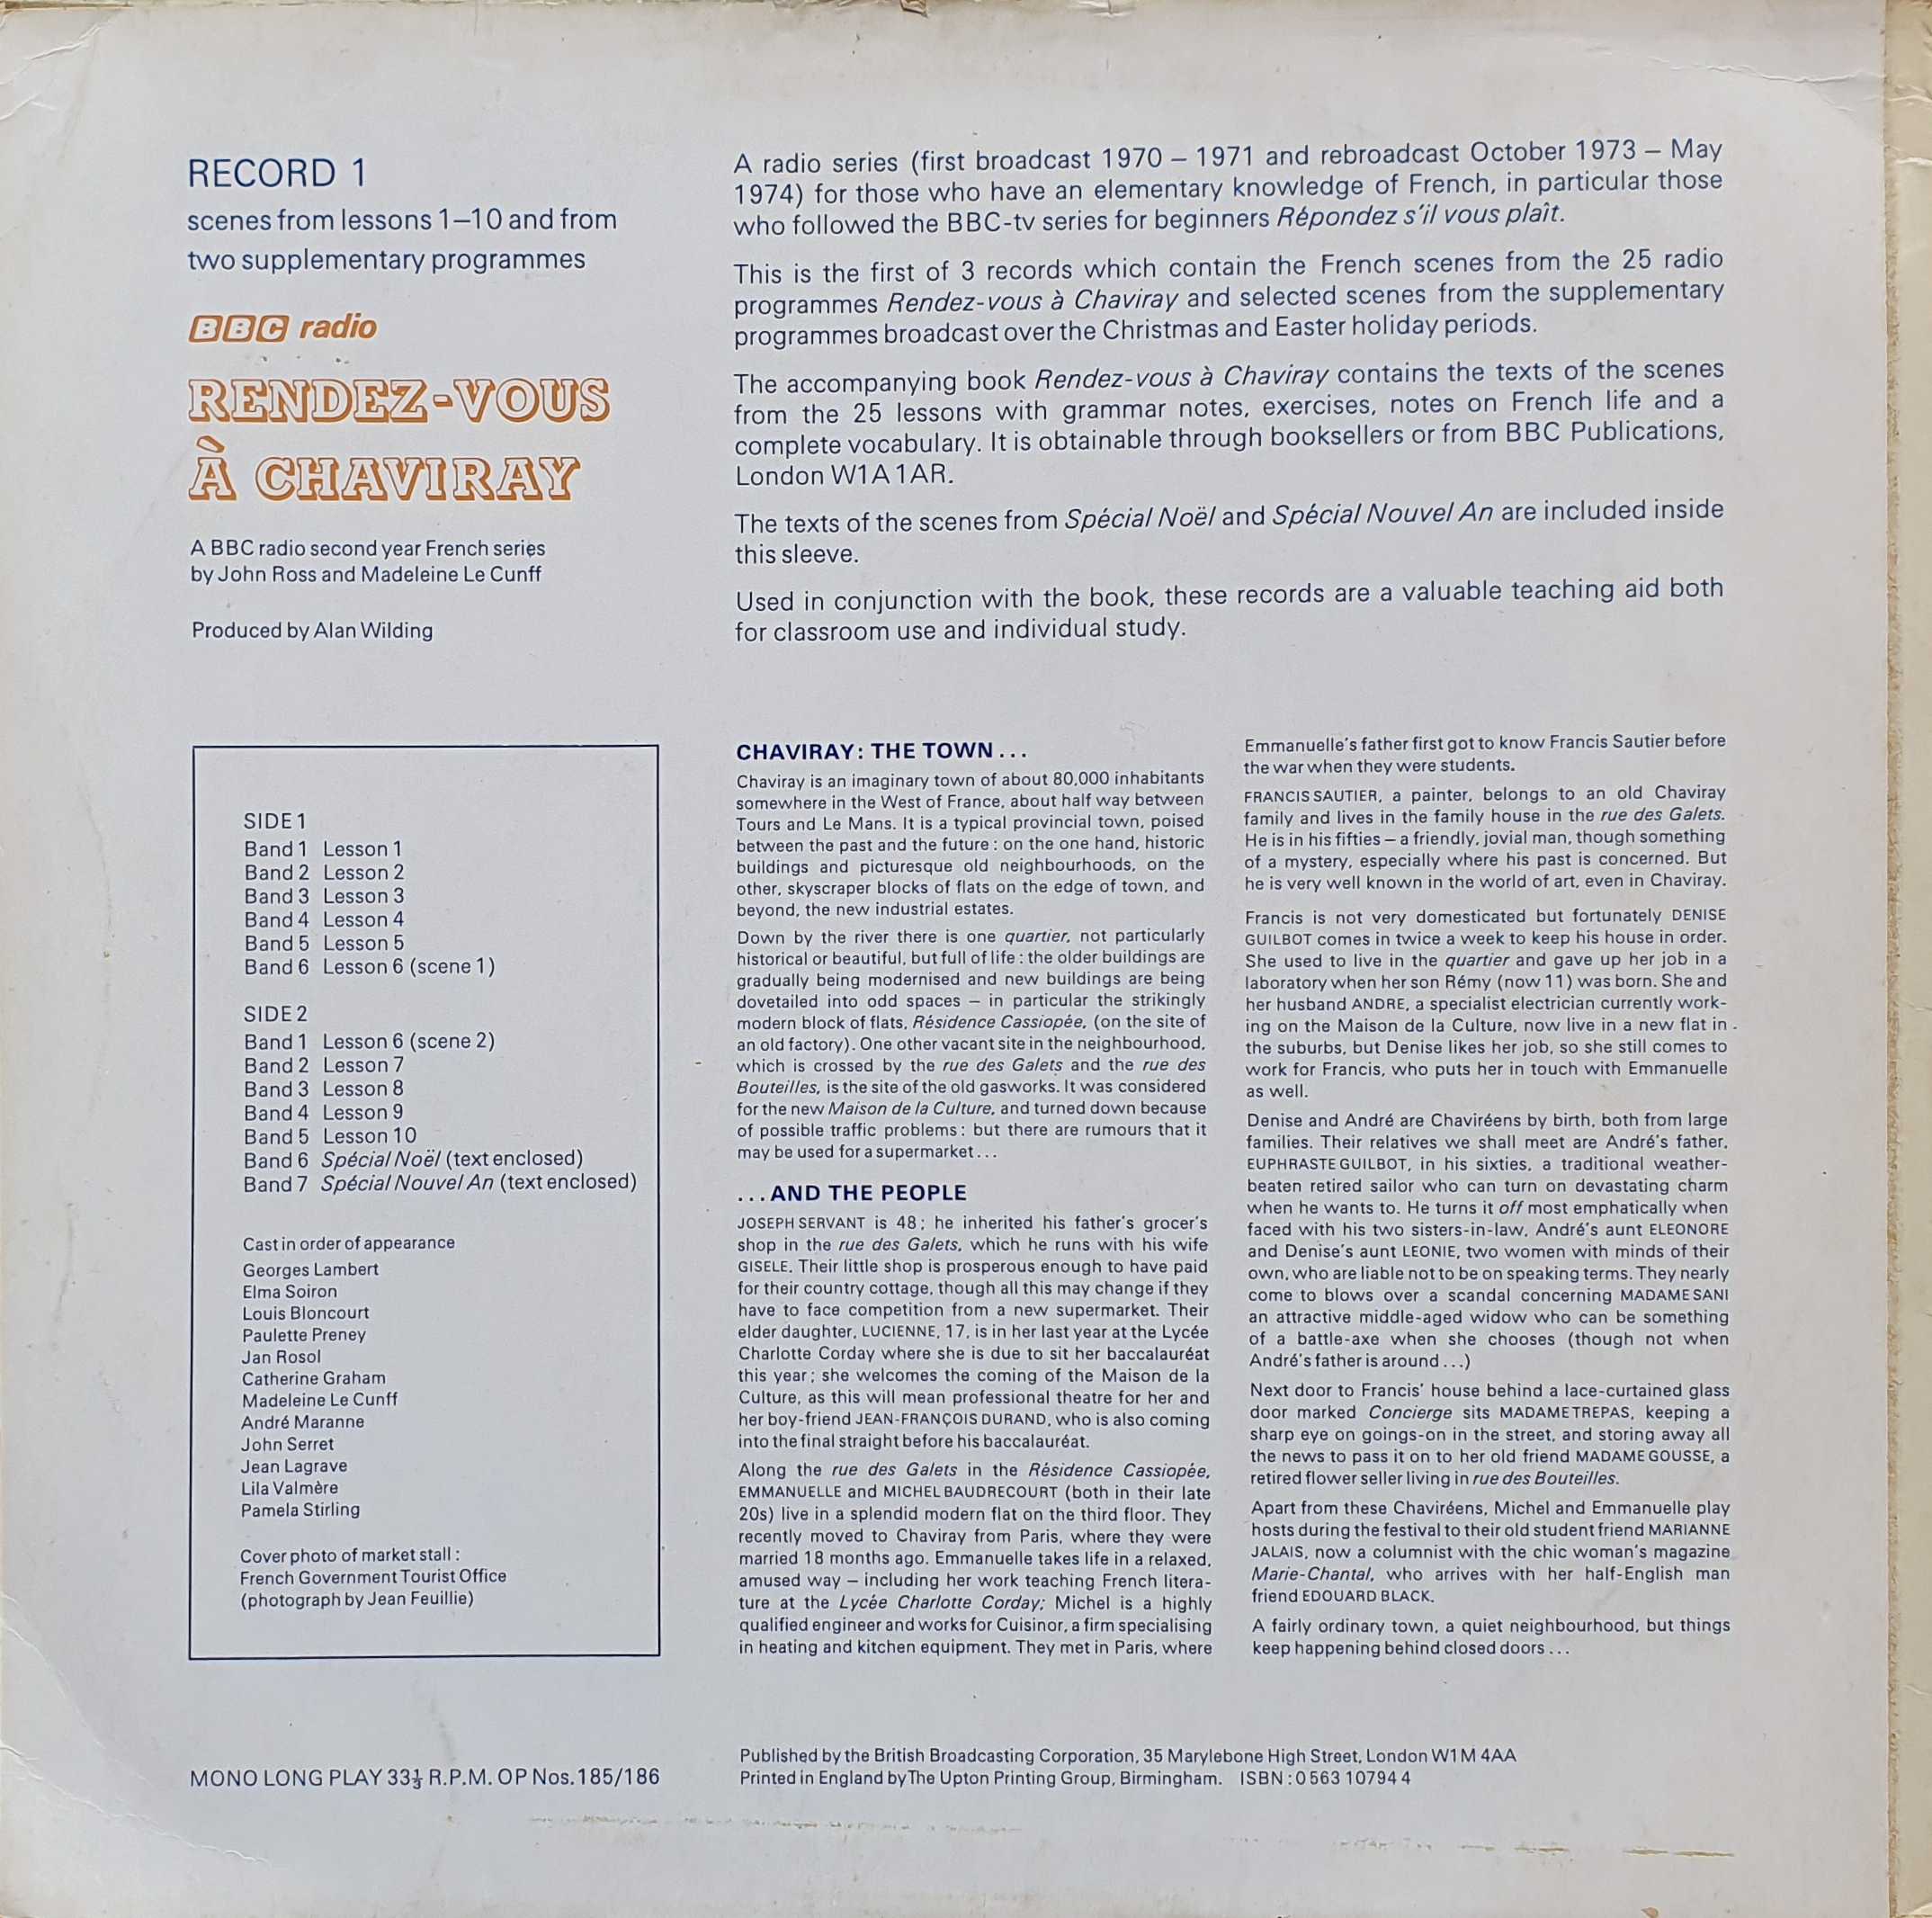 Picture of OP 185/186 Rendez-vous a Chaviray - BBC radio Second Year French - Record 1 - Lessons 1 - 10 by artist John Ross / Madeleine Le Cunff from the BBC records and Tapes library